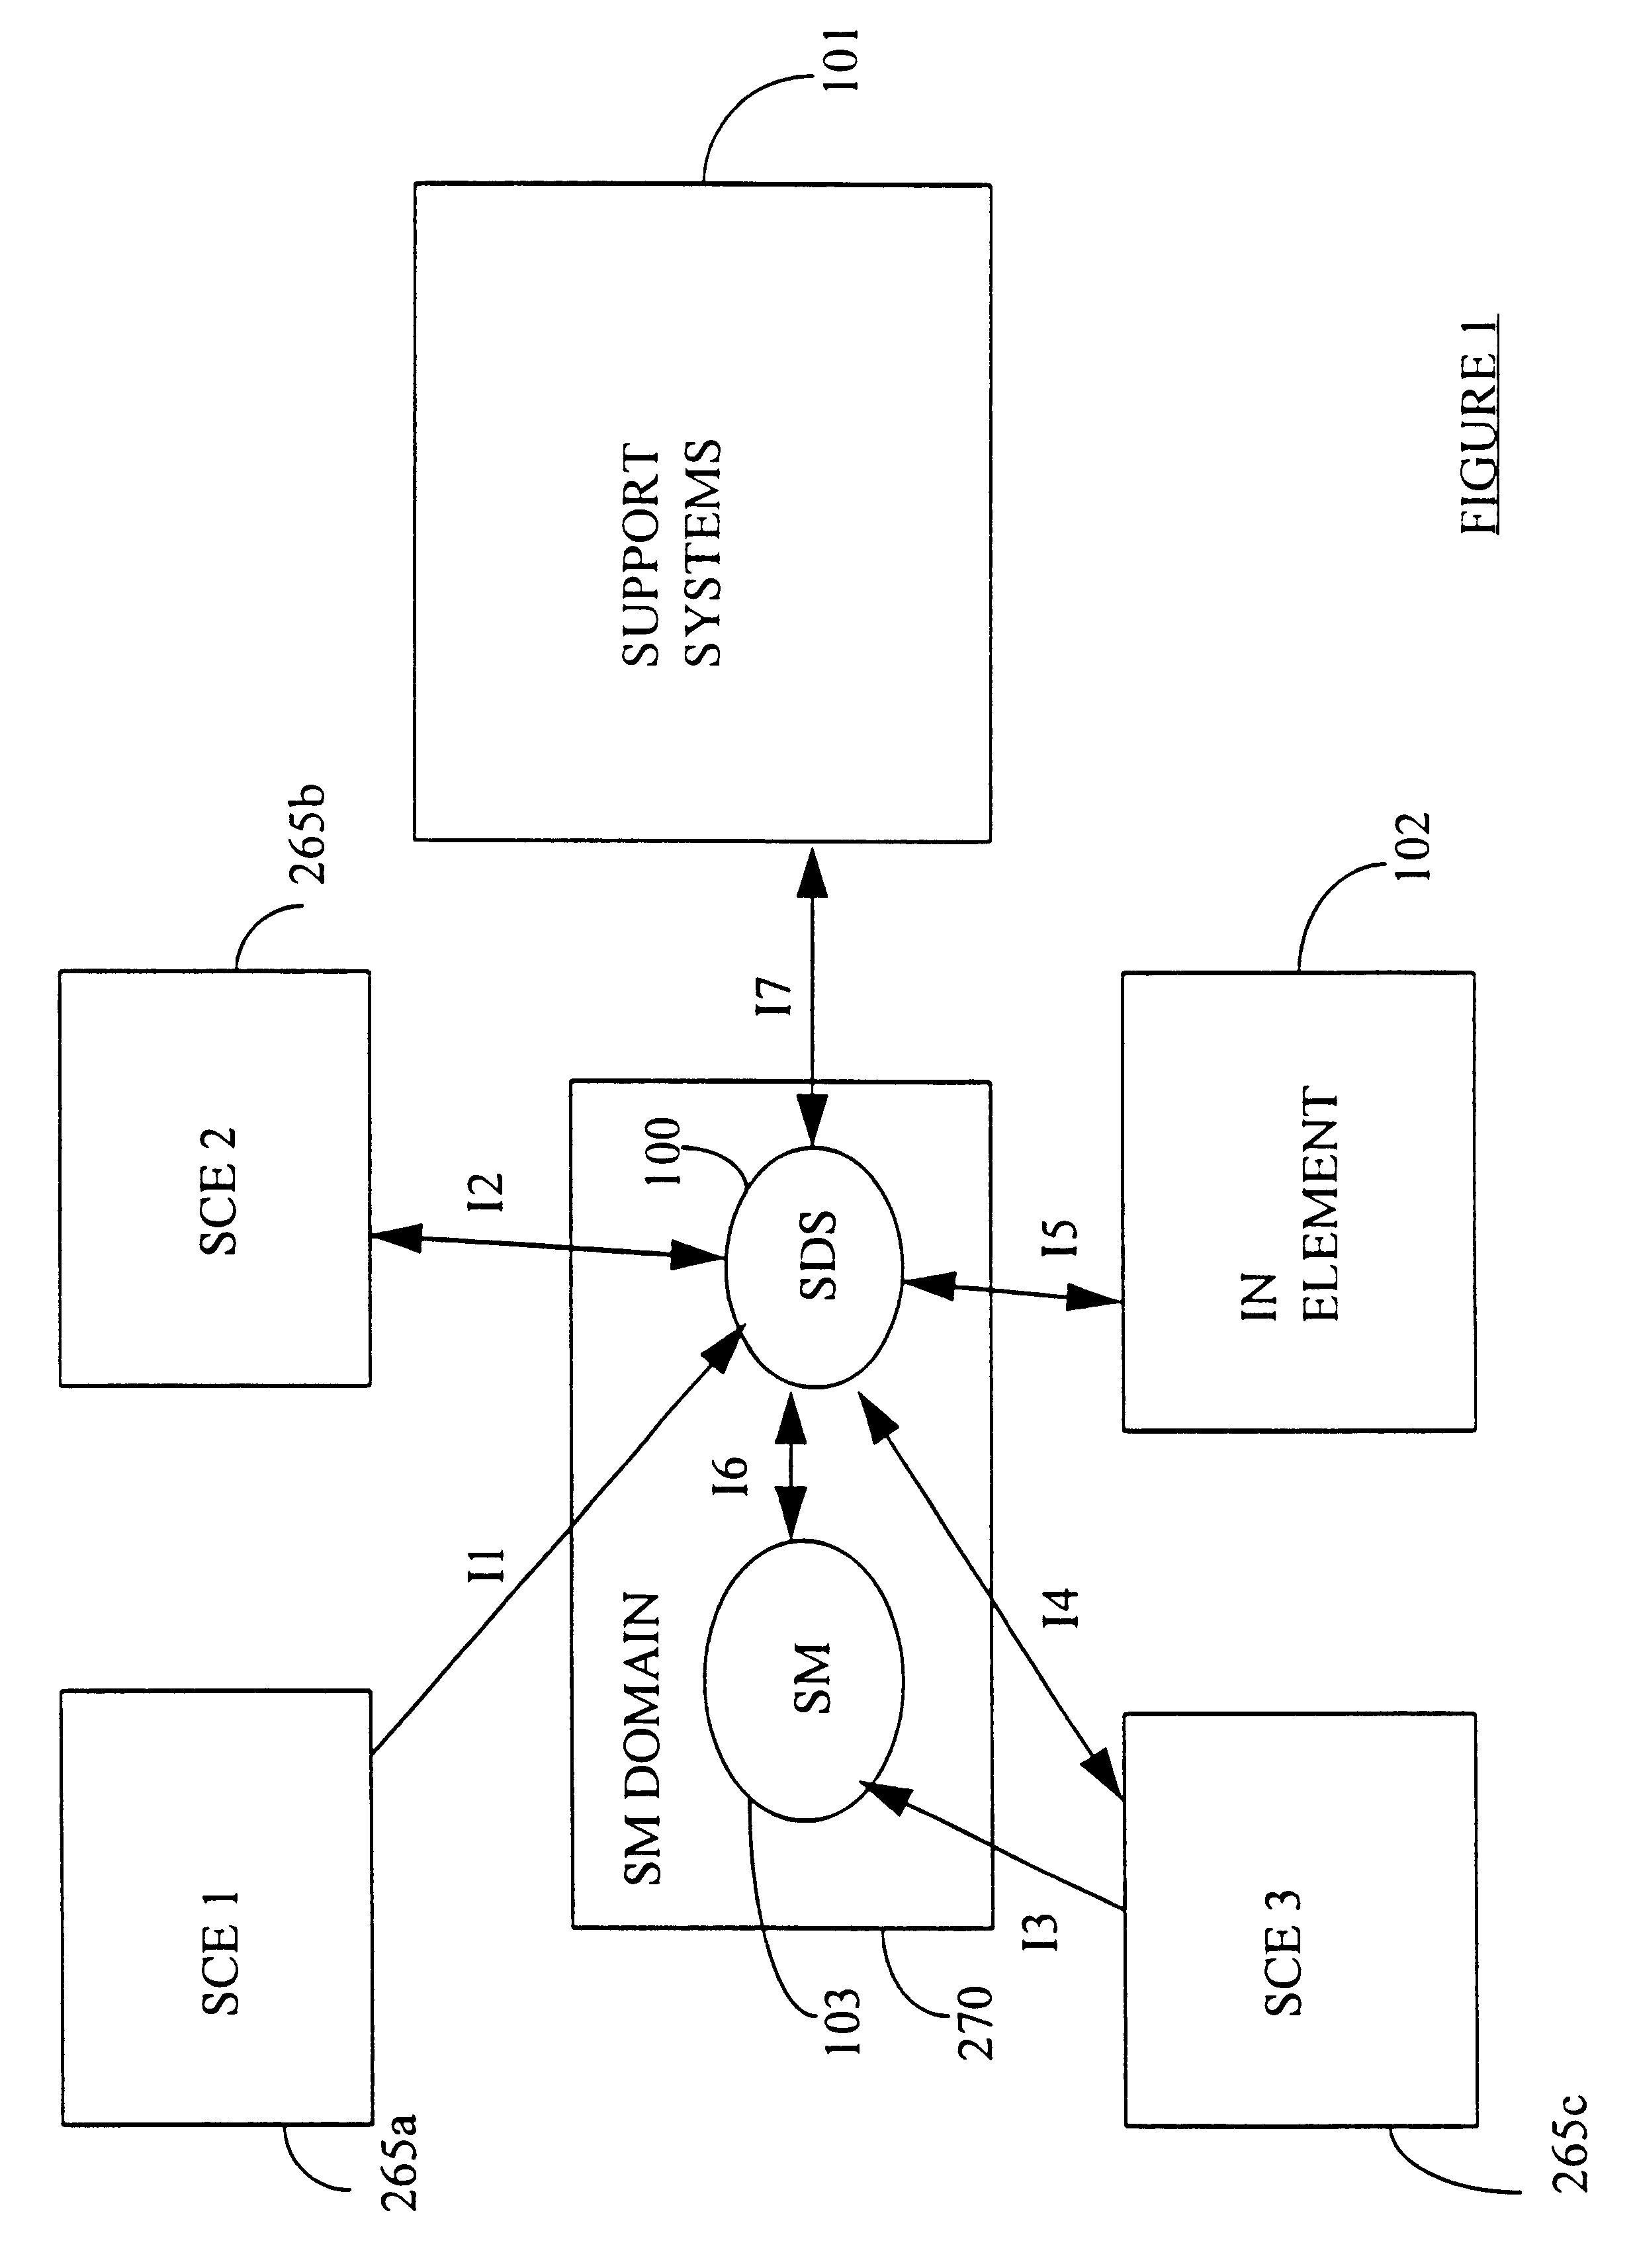 Service creation apparatus for a communications network